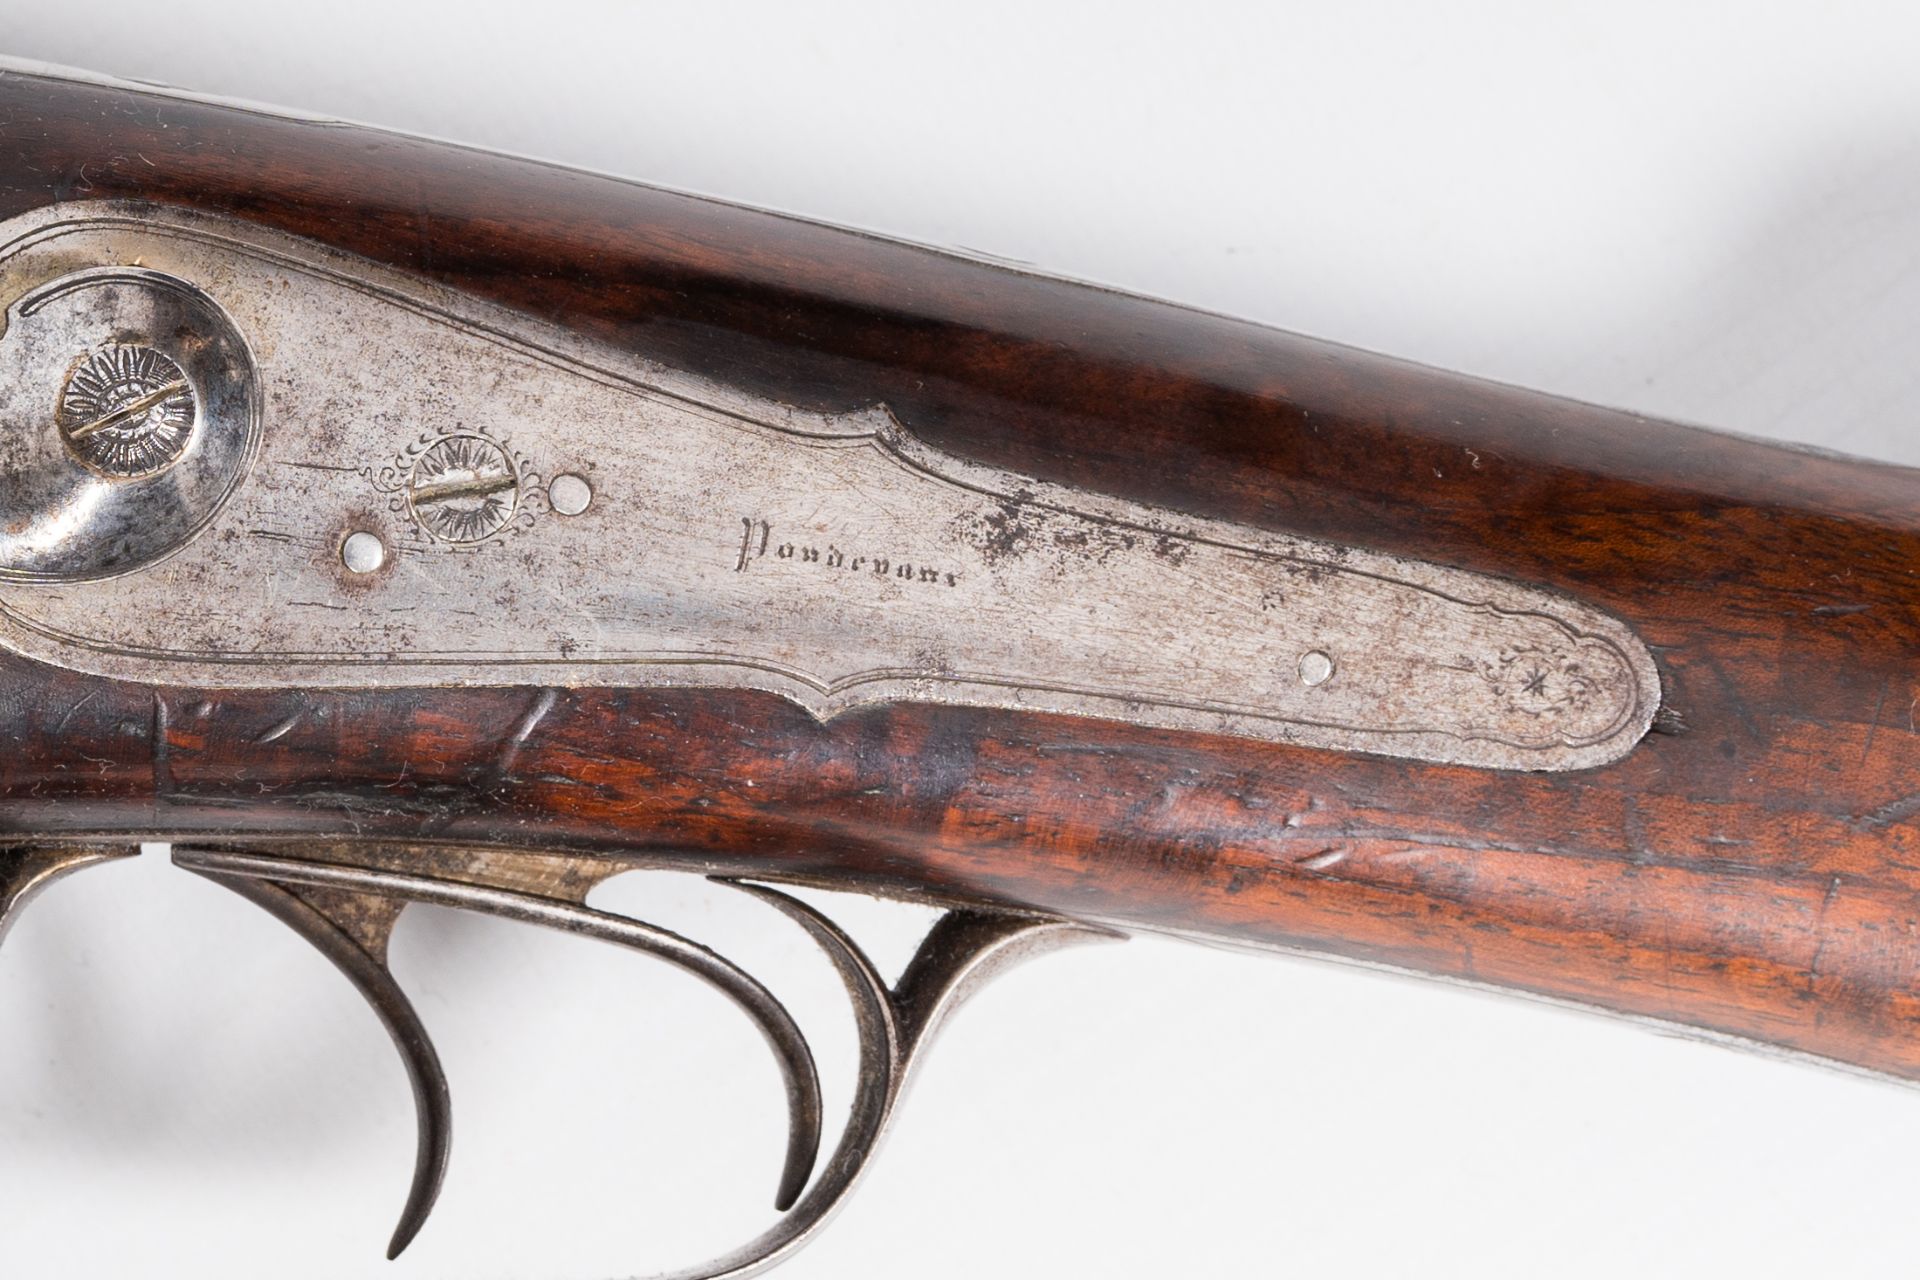 A French double barrel pinfire shotgun with a damask barrel, marked Pondevaux - St. Etienne, 19th C. - Image 6 of 6